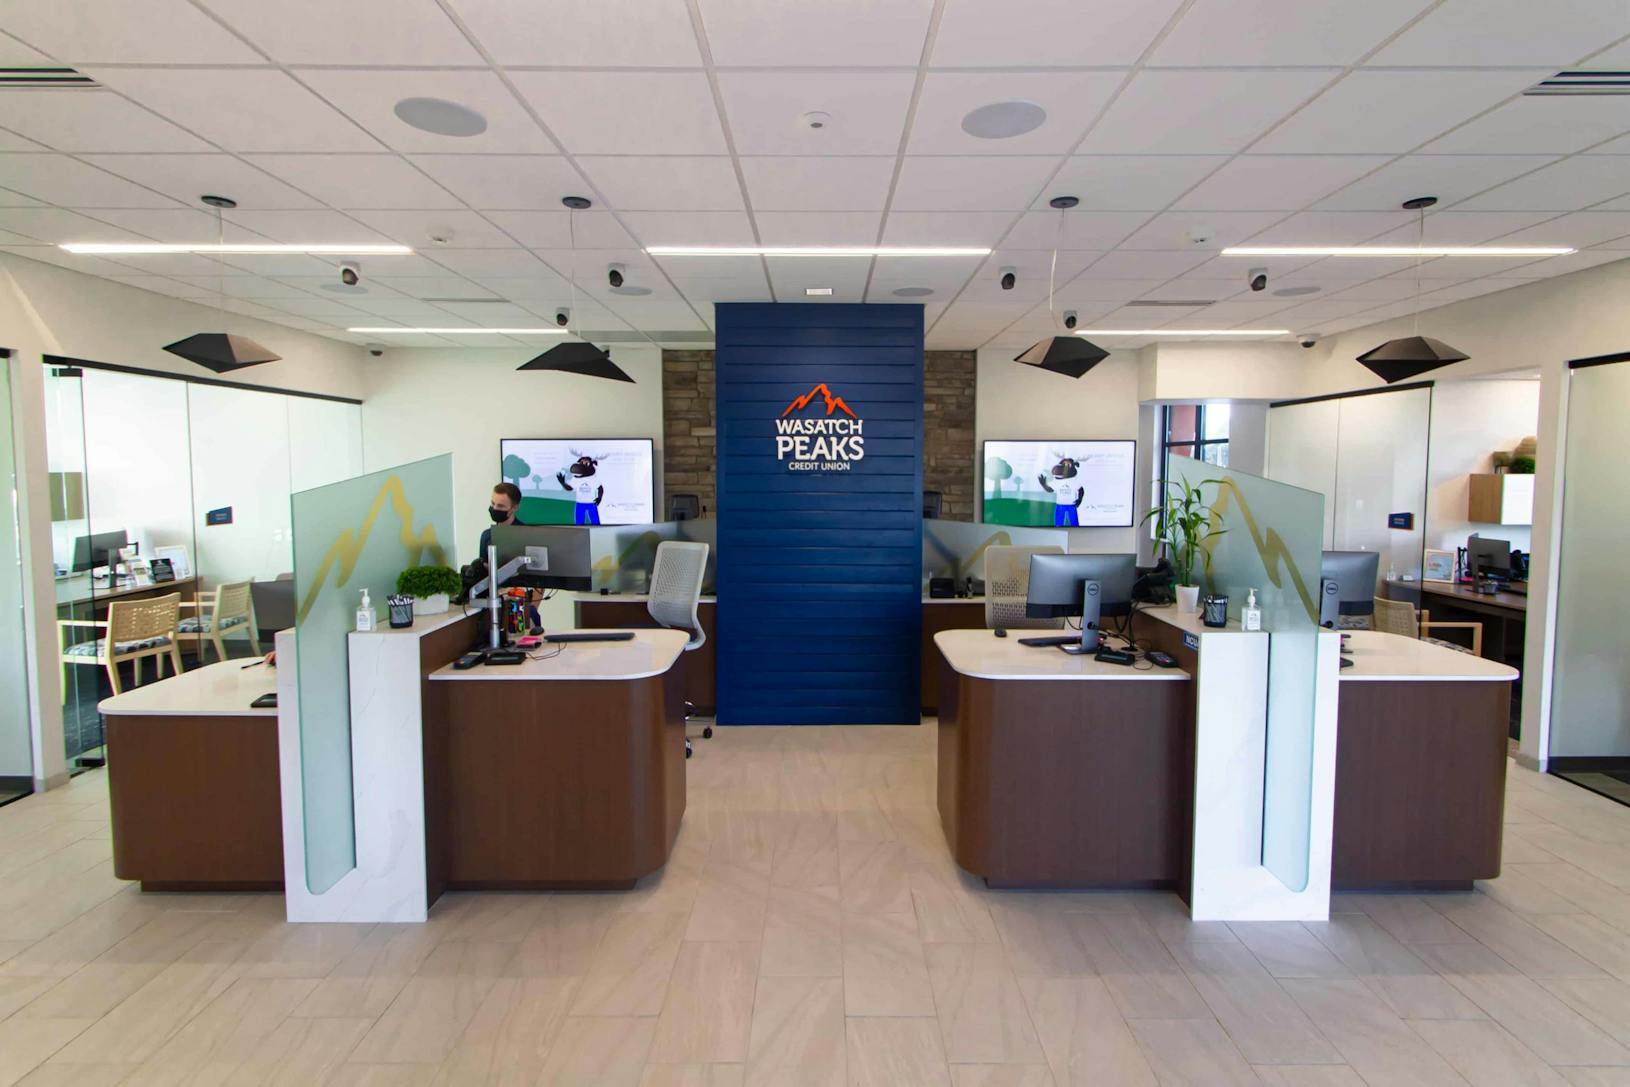 Teller booths at Wasatch Peaks Credit Union